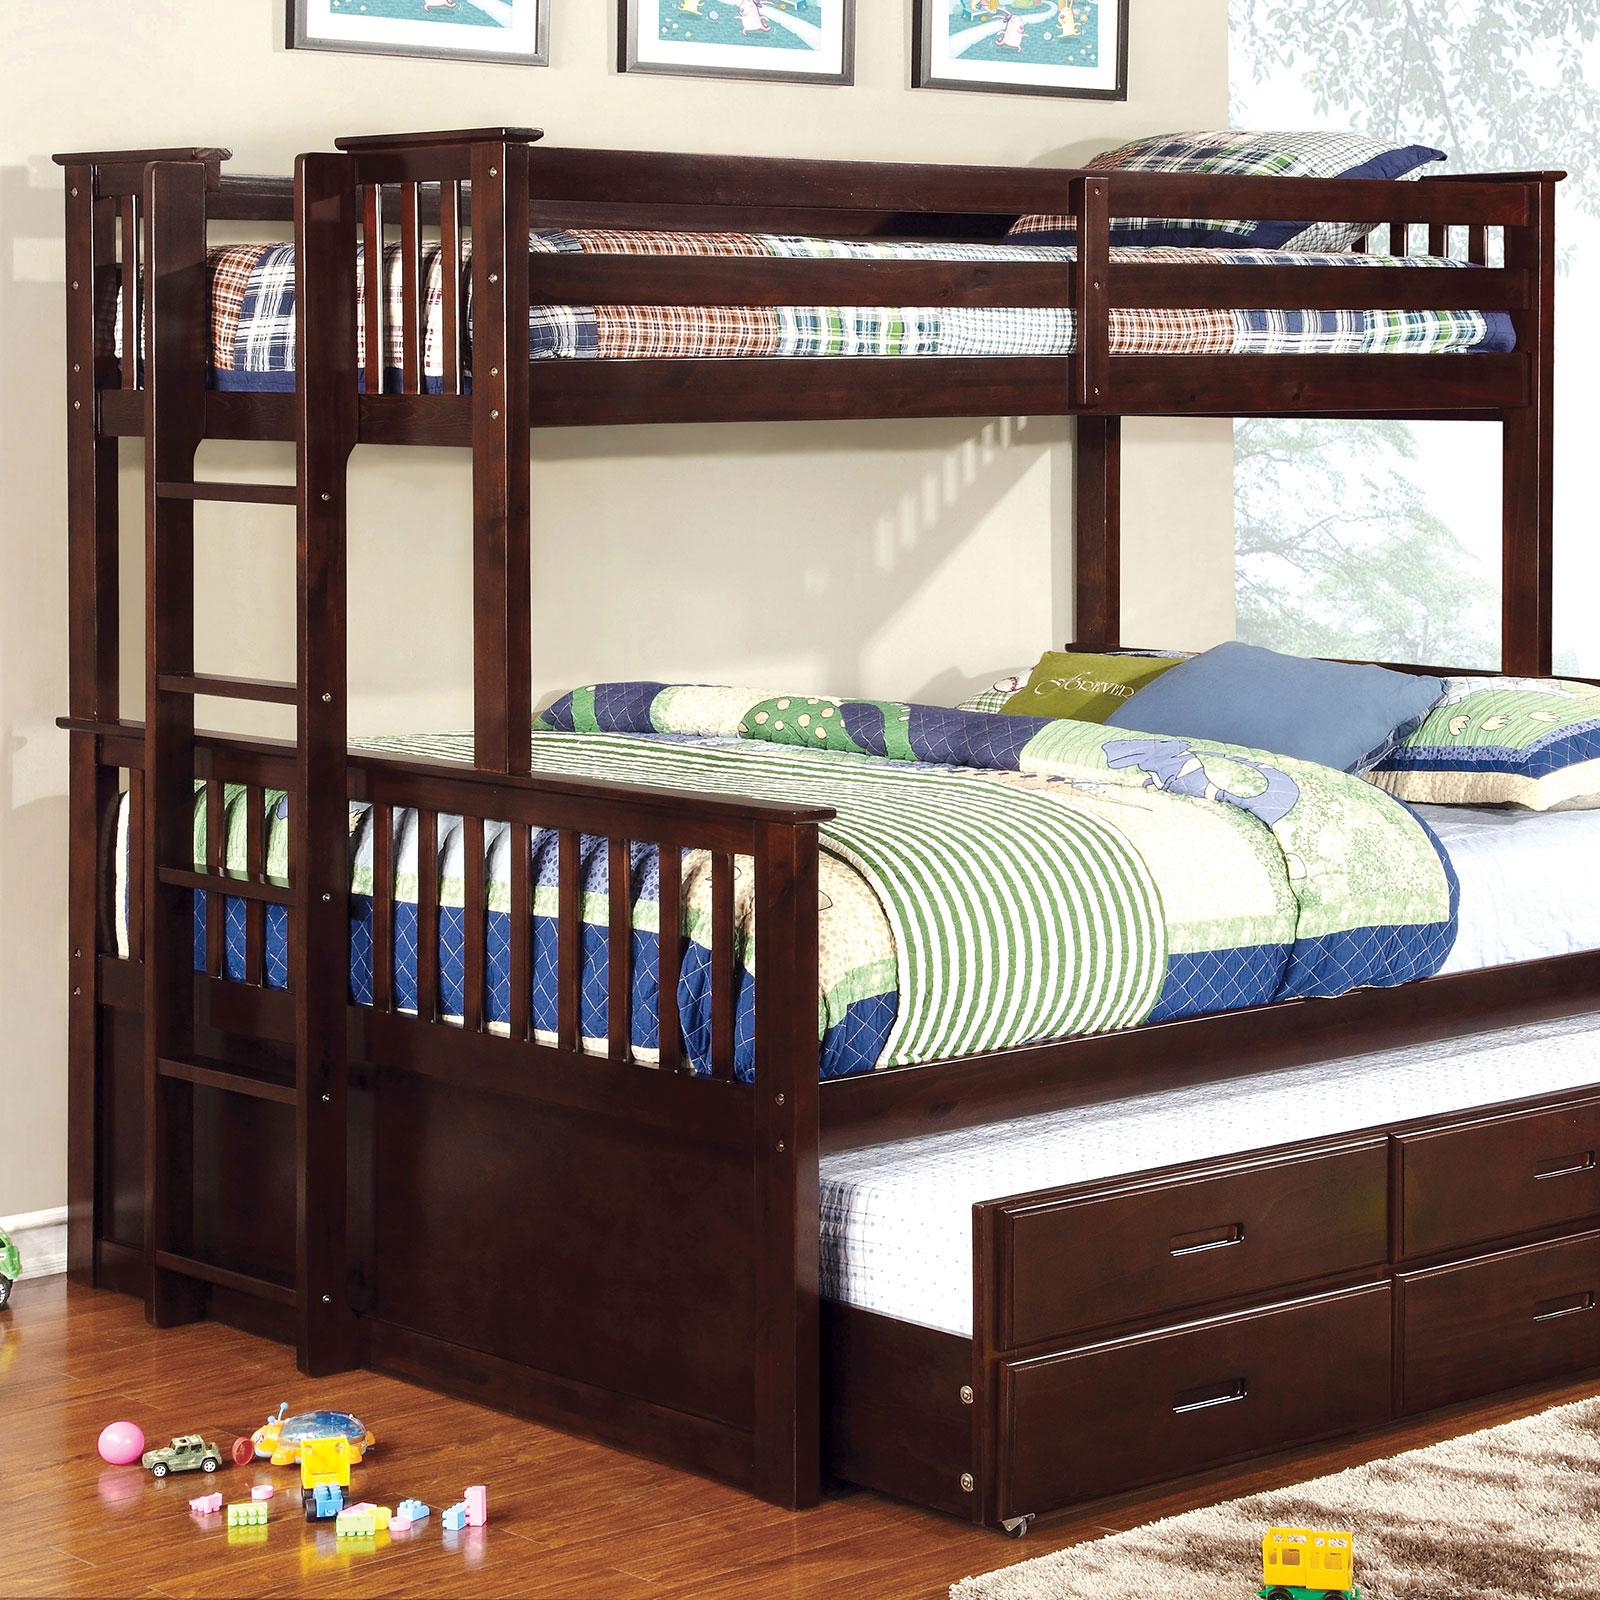 

    
Cottage Wood Queen Bunk Bed in Dark Brown University by Furniture of America
